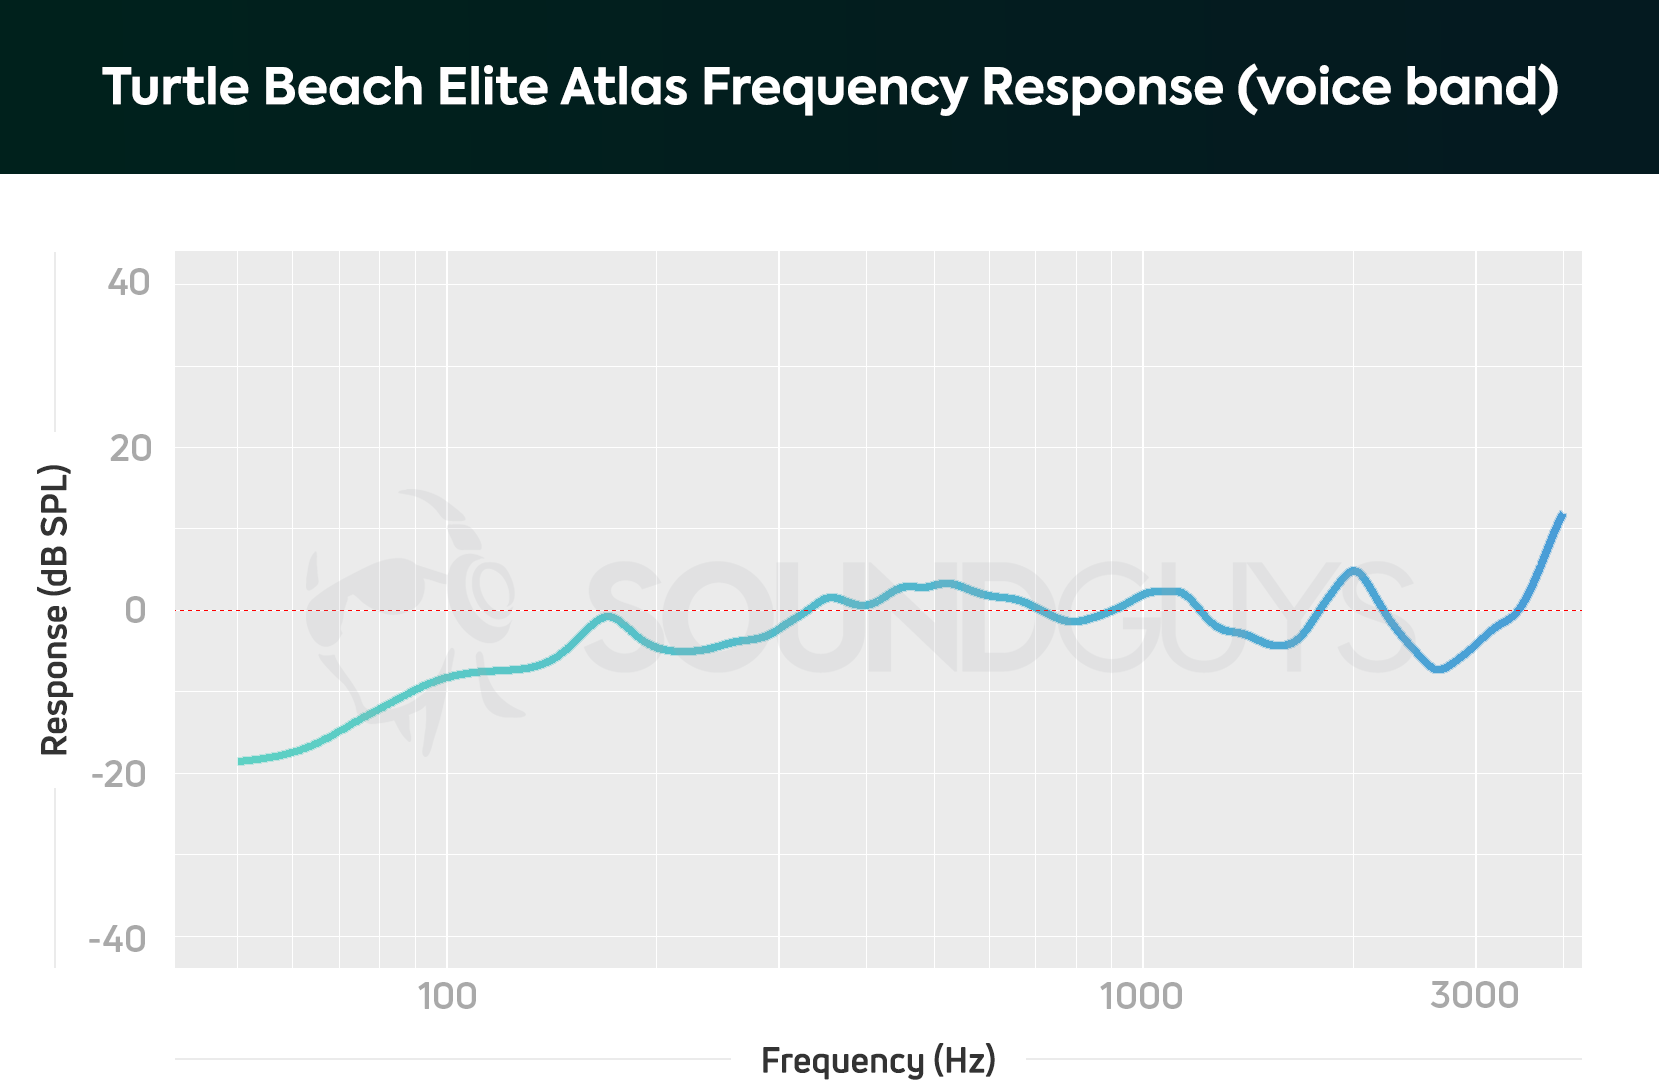 A frequency response chart for The Turtle Beach Elite Atlas gaming headset, showing less de-emphasis in the bass range than most gaming headset microphones.